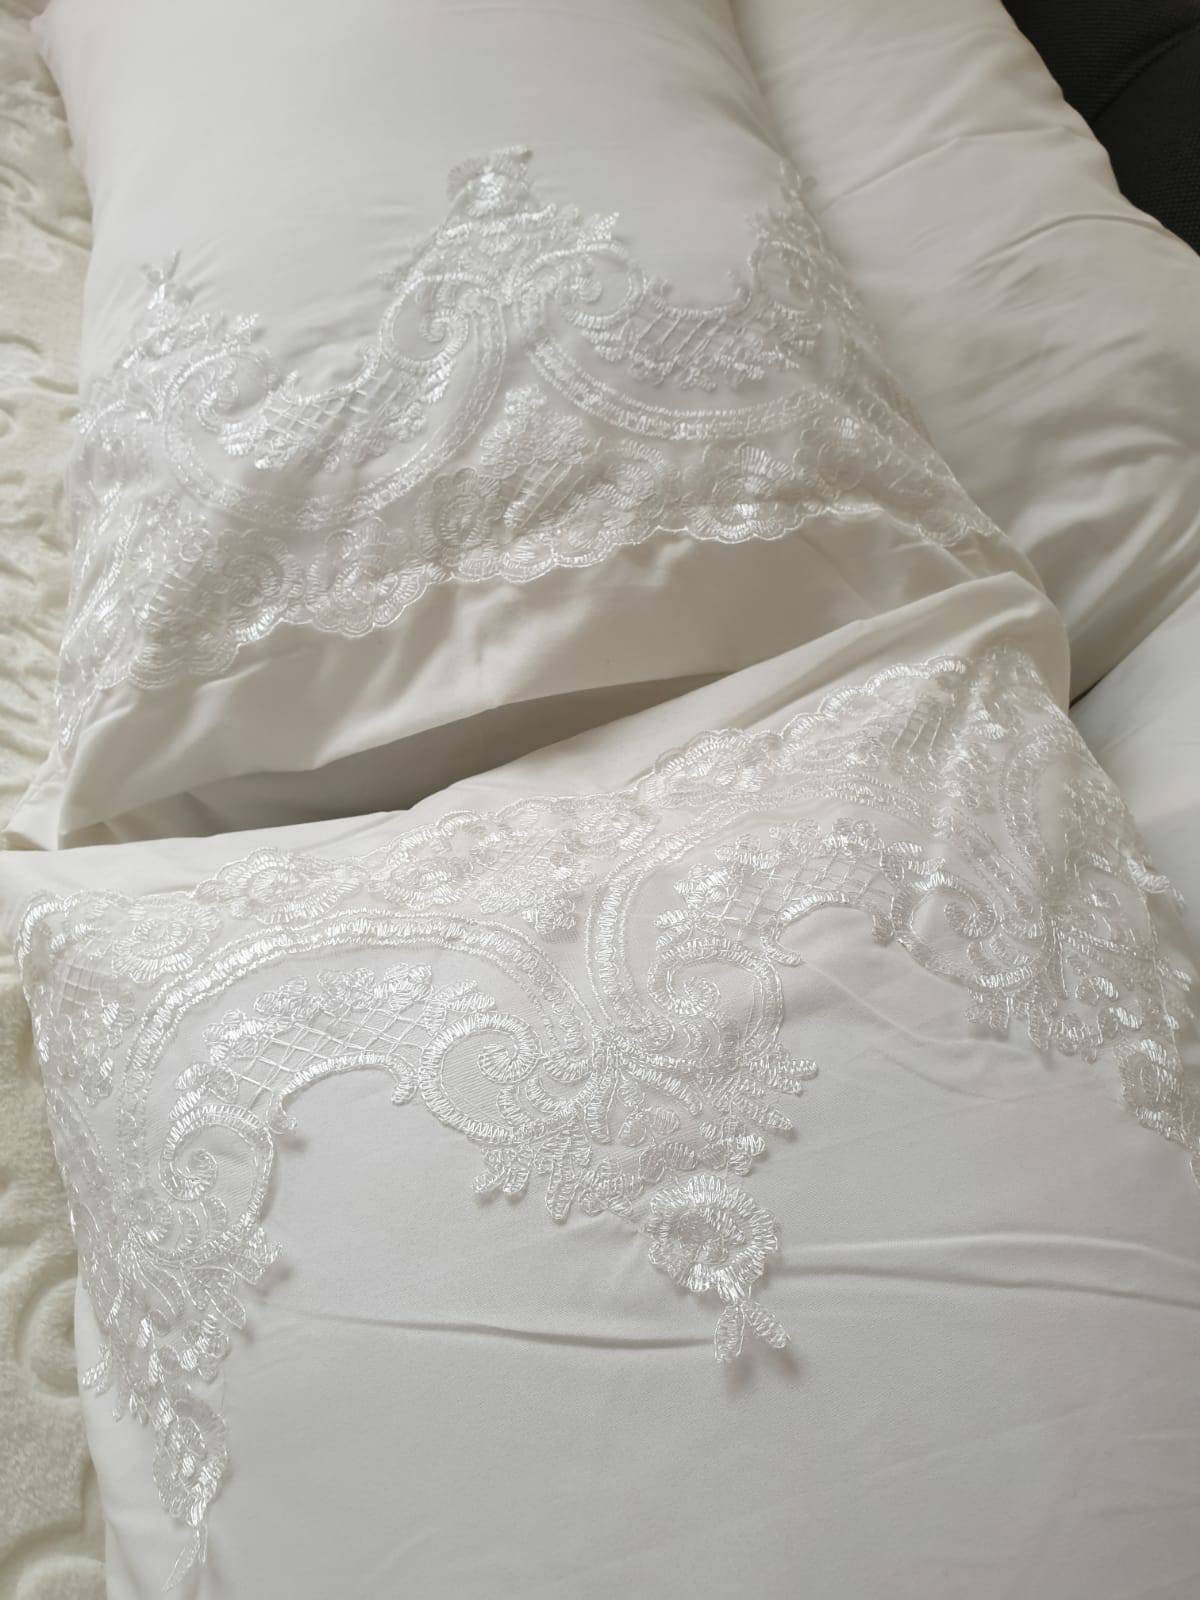 Throw set French Lace embroidered blanket set with pearls perfect Bridal gift 